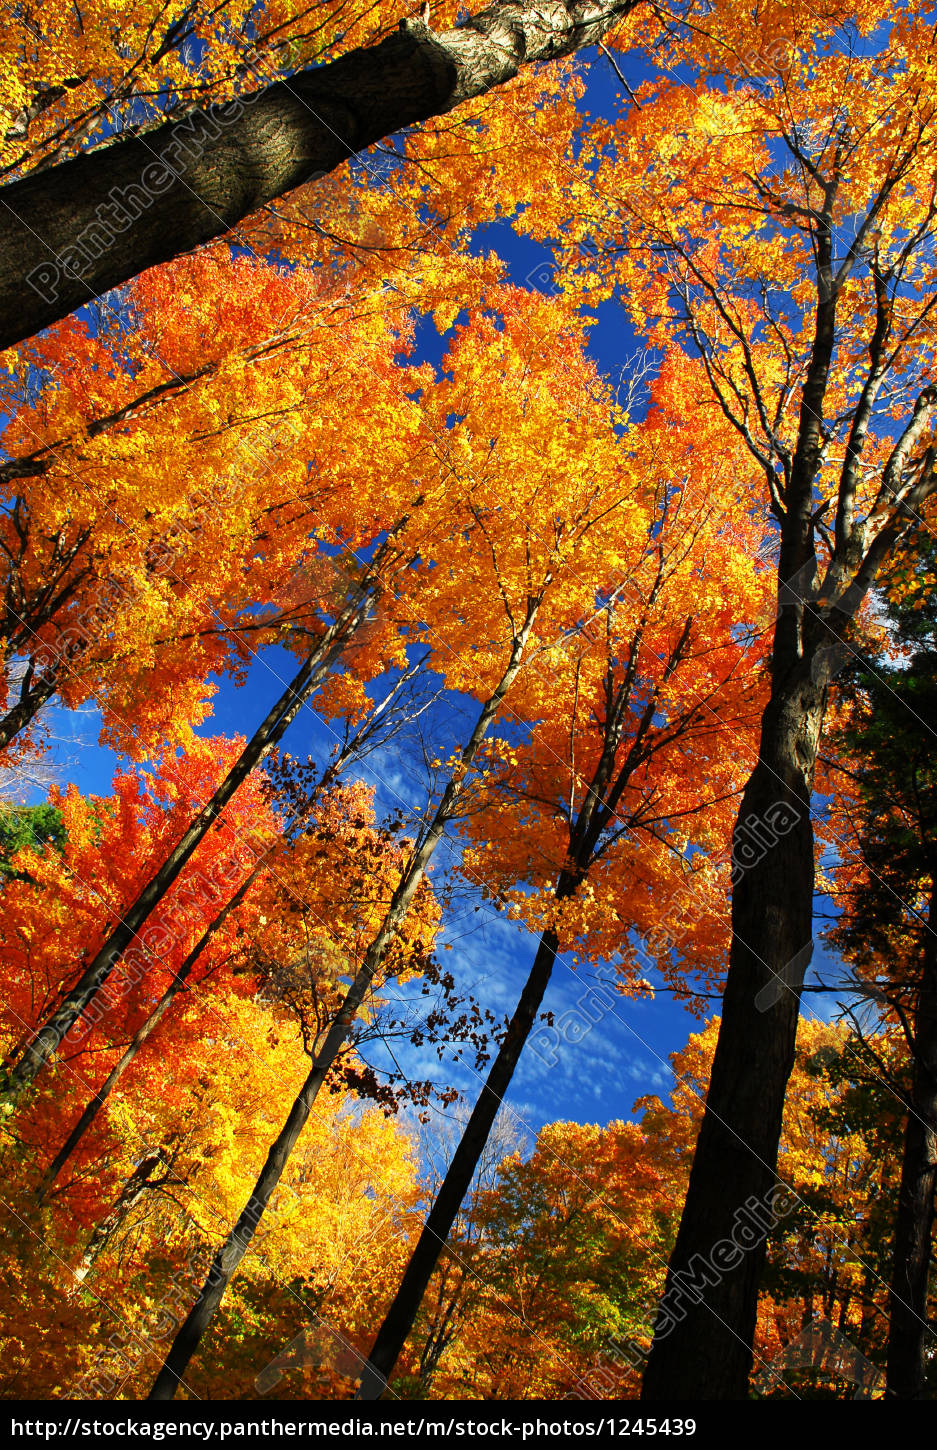 Autumn forest - Stock Photo - #1245439 | PantherMedia Stock Agency